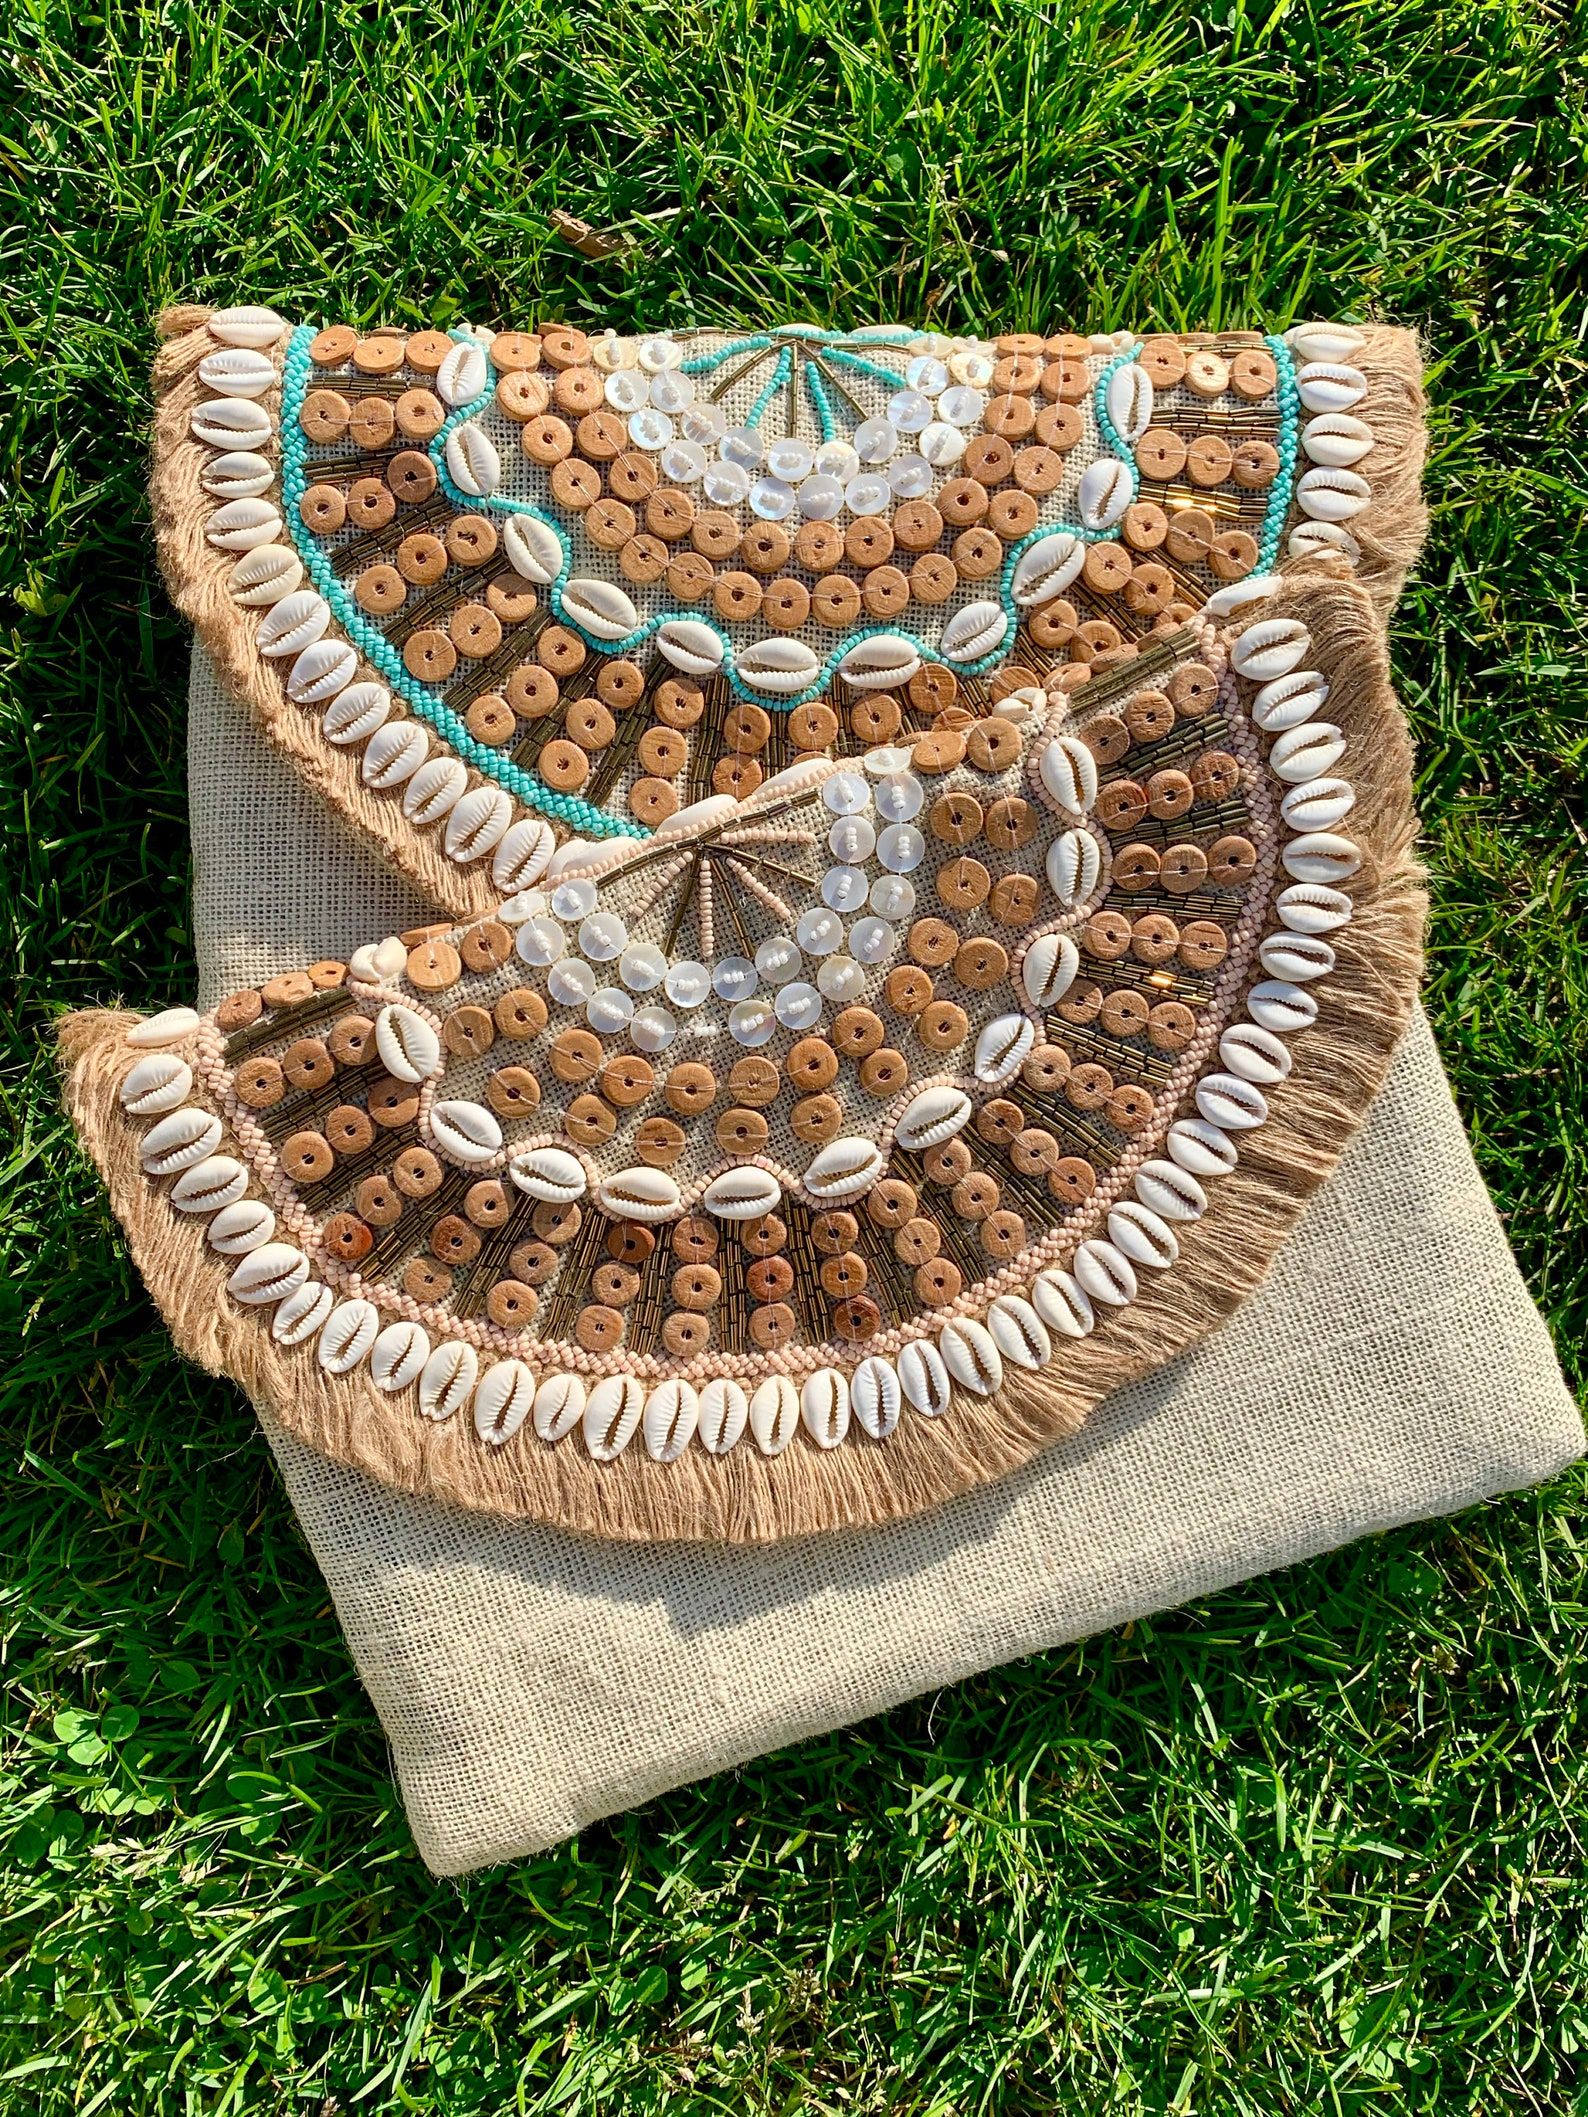 Chic and Sustainable: Jute Bags for Every Occasion